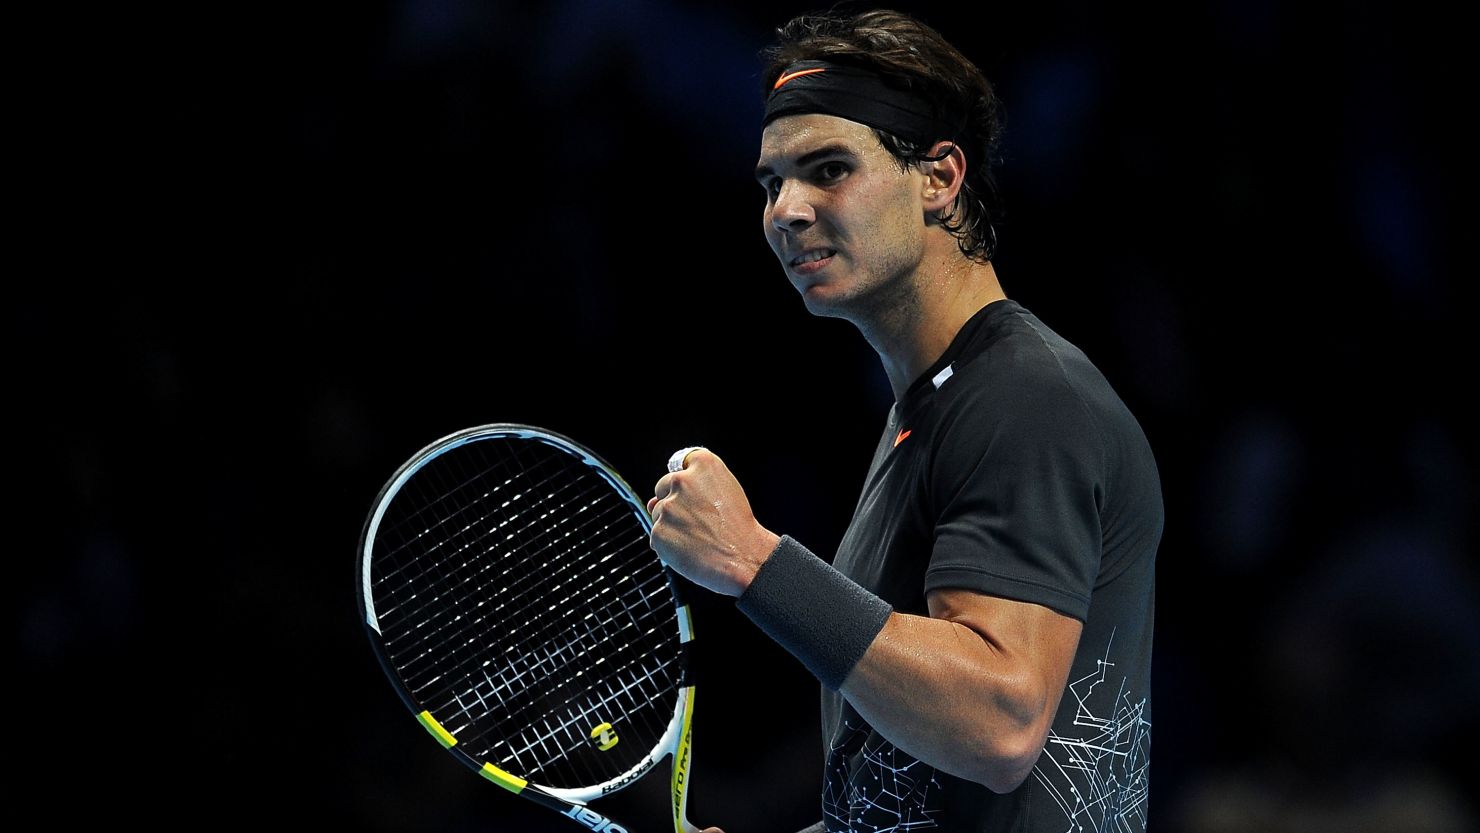 Rafael Nadal was made to fight all the way by Mardy Fish, eventually sealing victory in just under three hours.